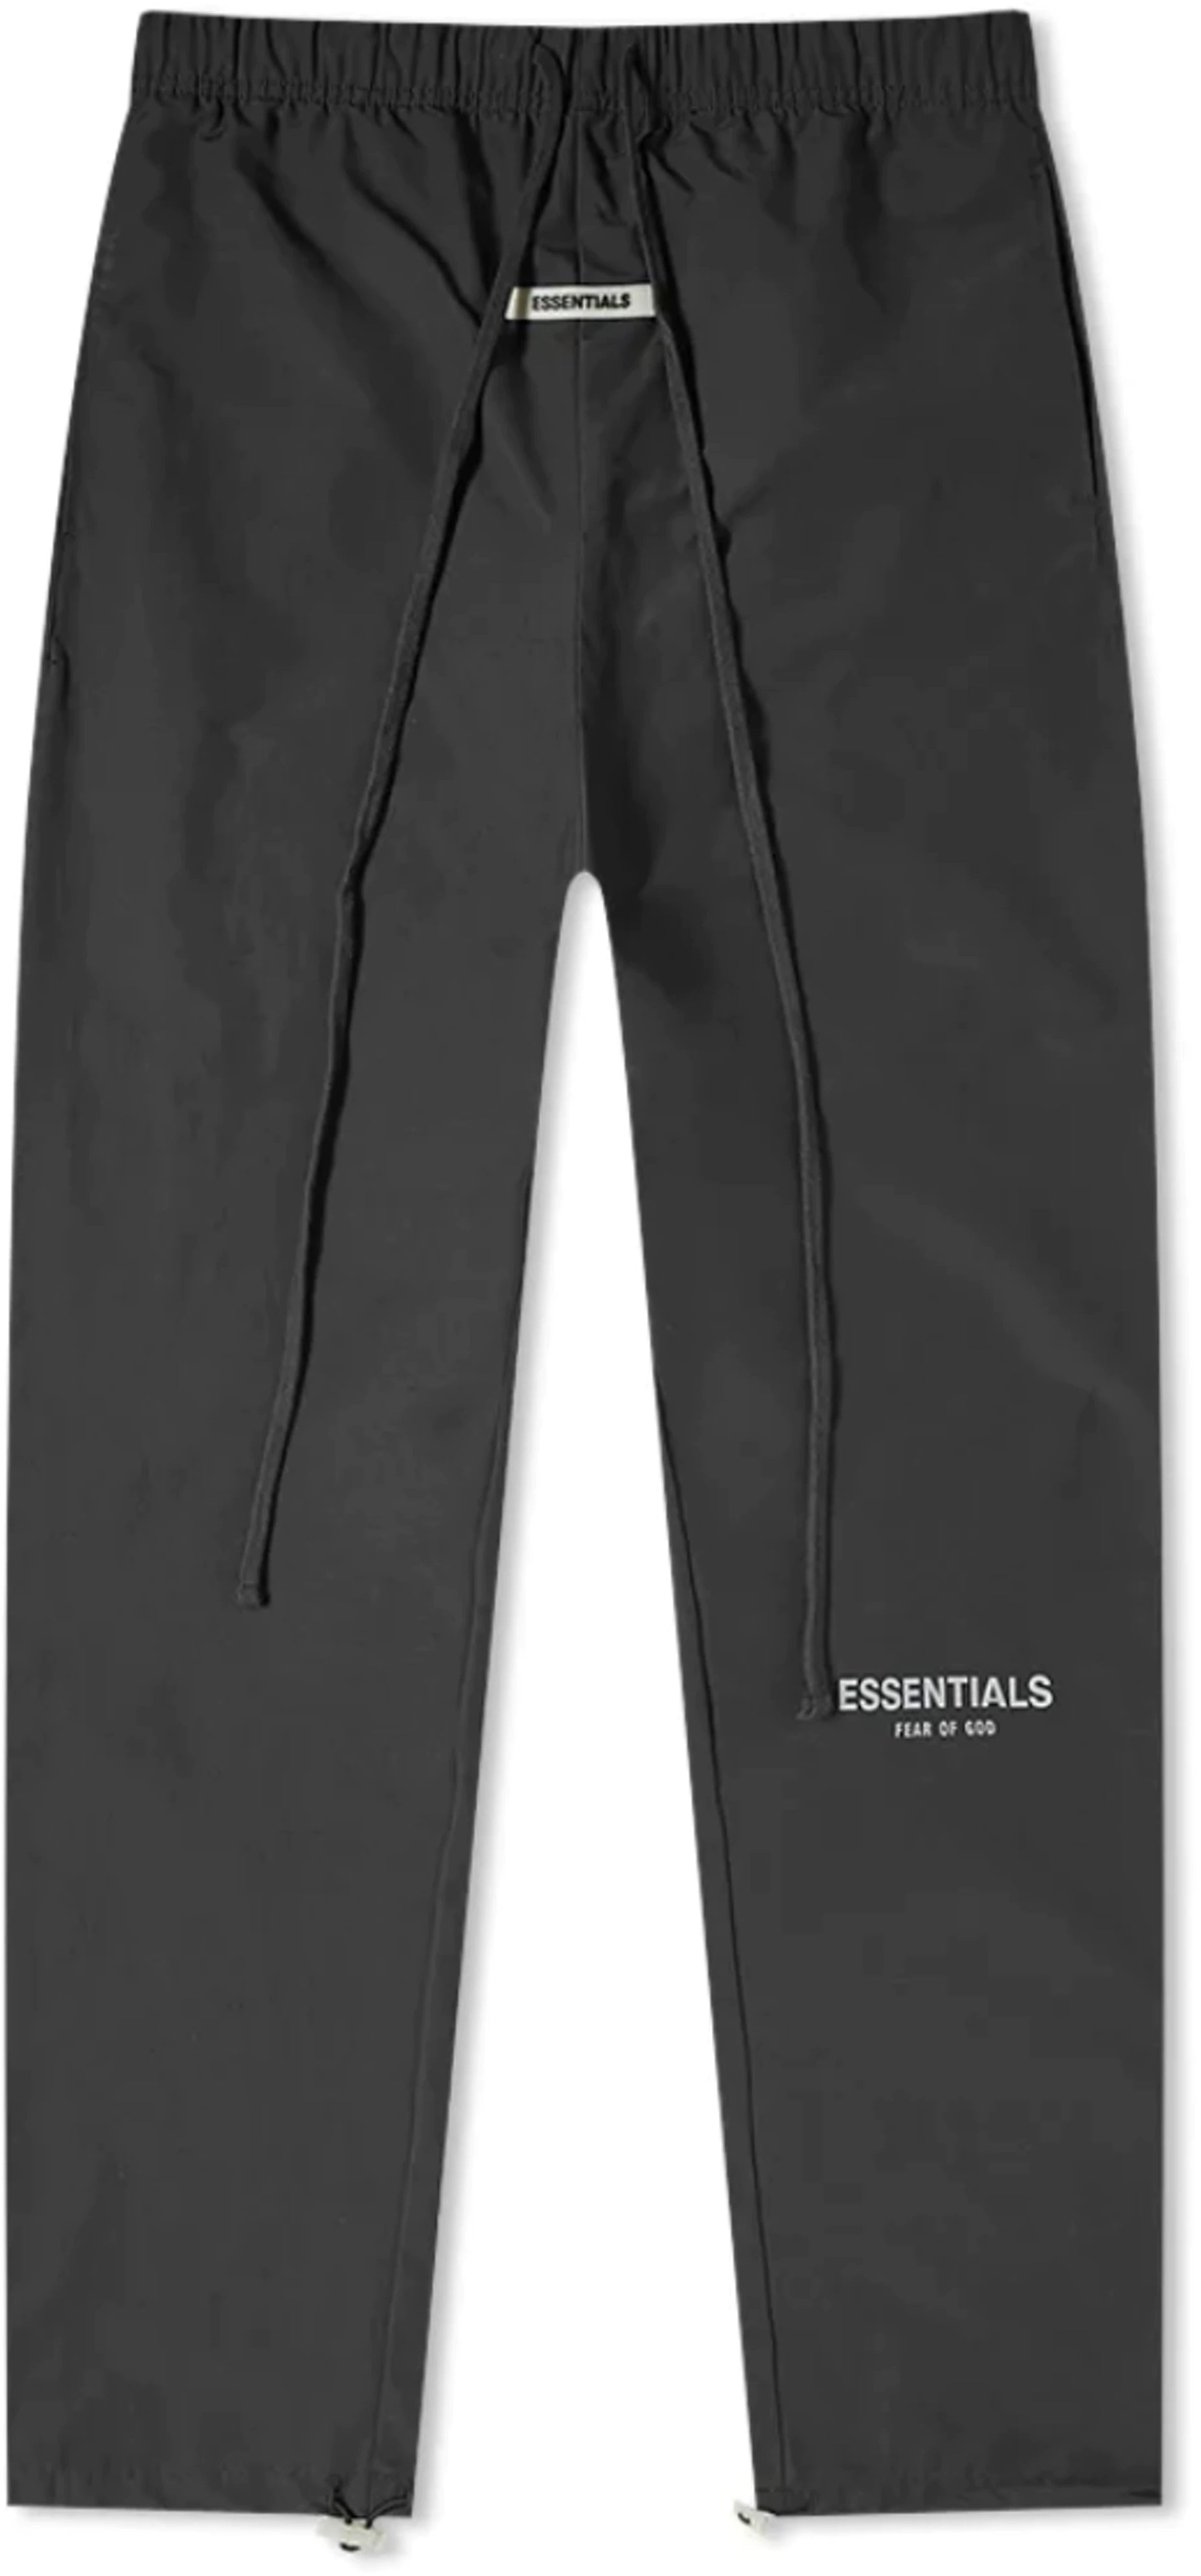 Fear Of God Essentials Track Pants Review & Sizing (Harvest) 